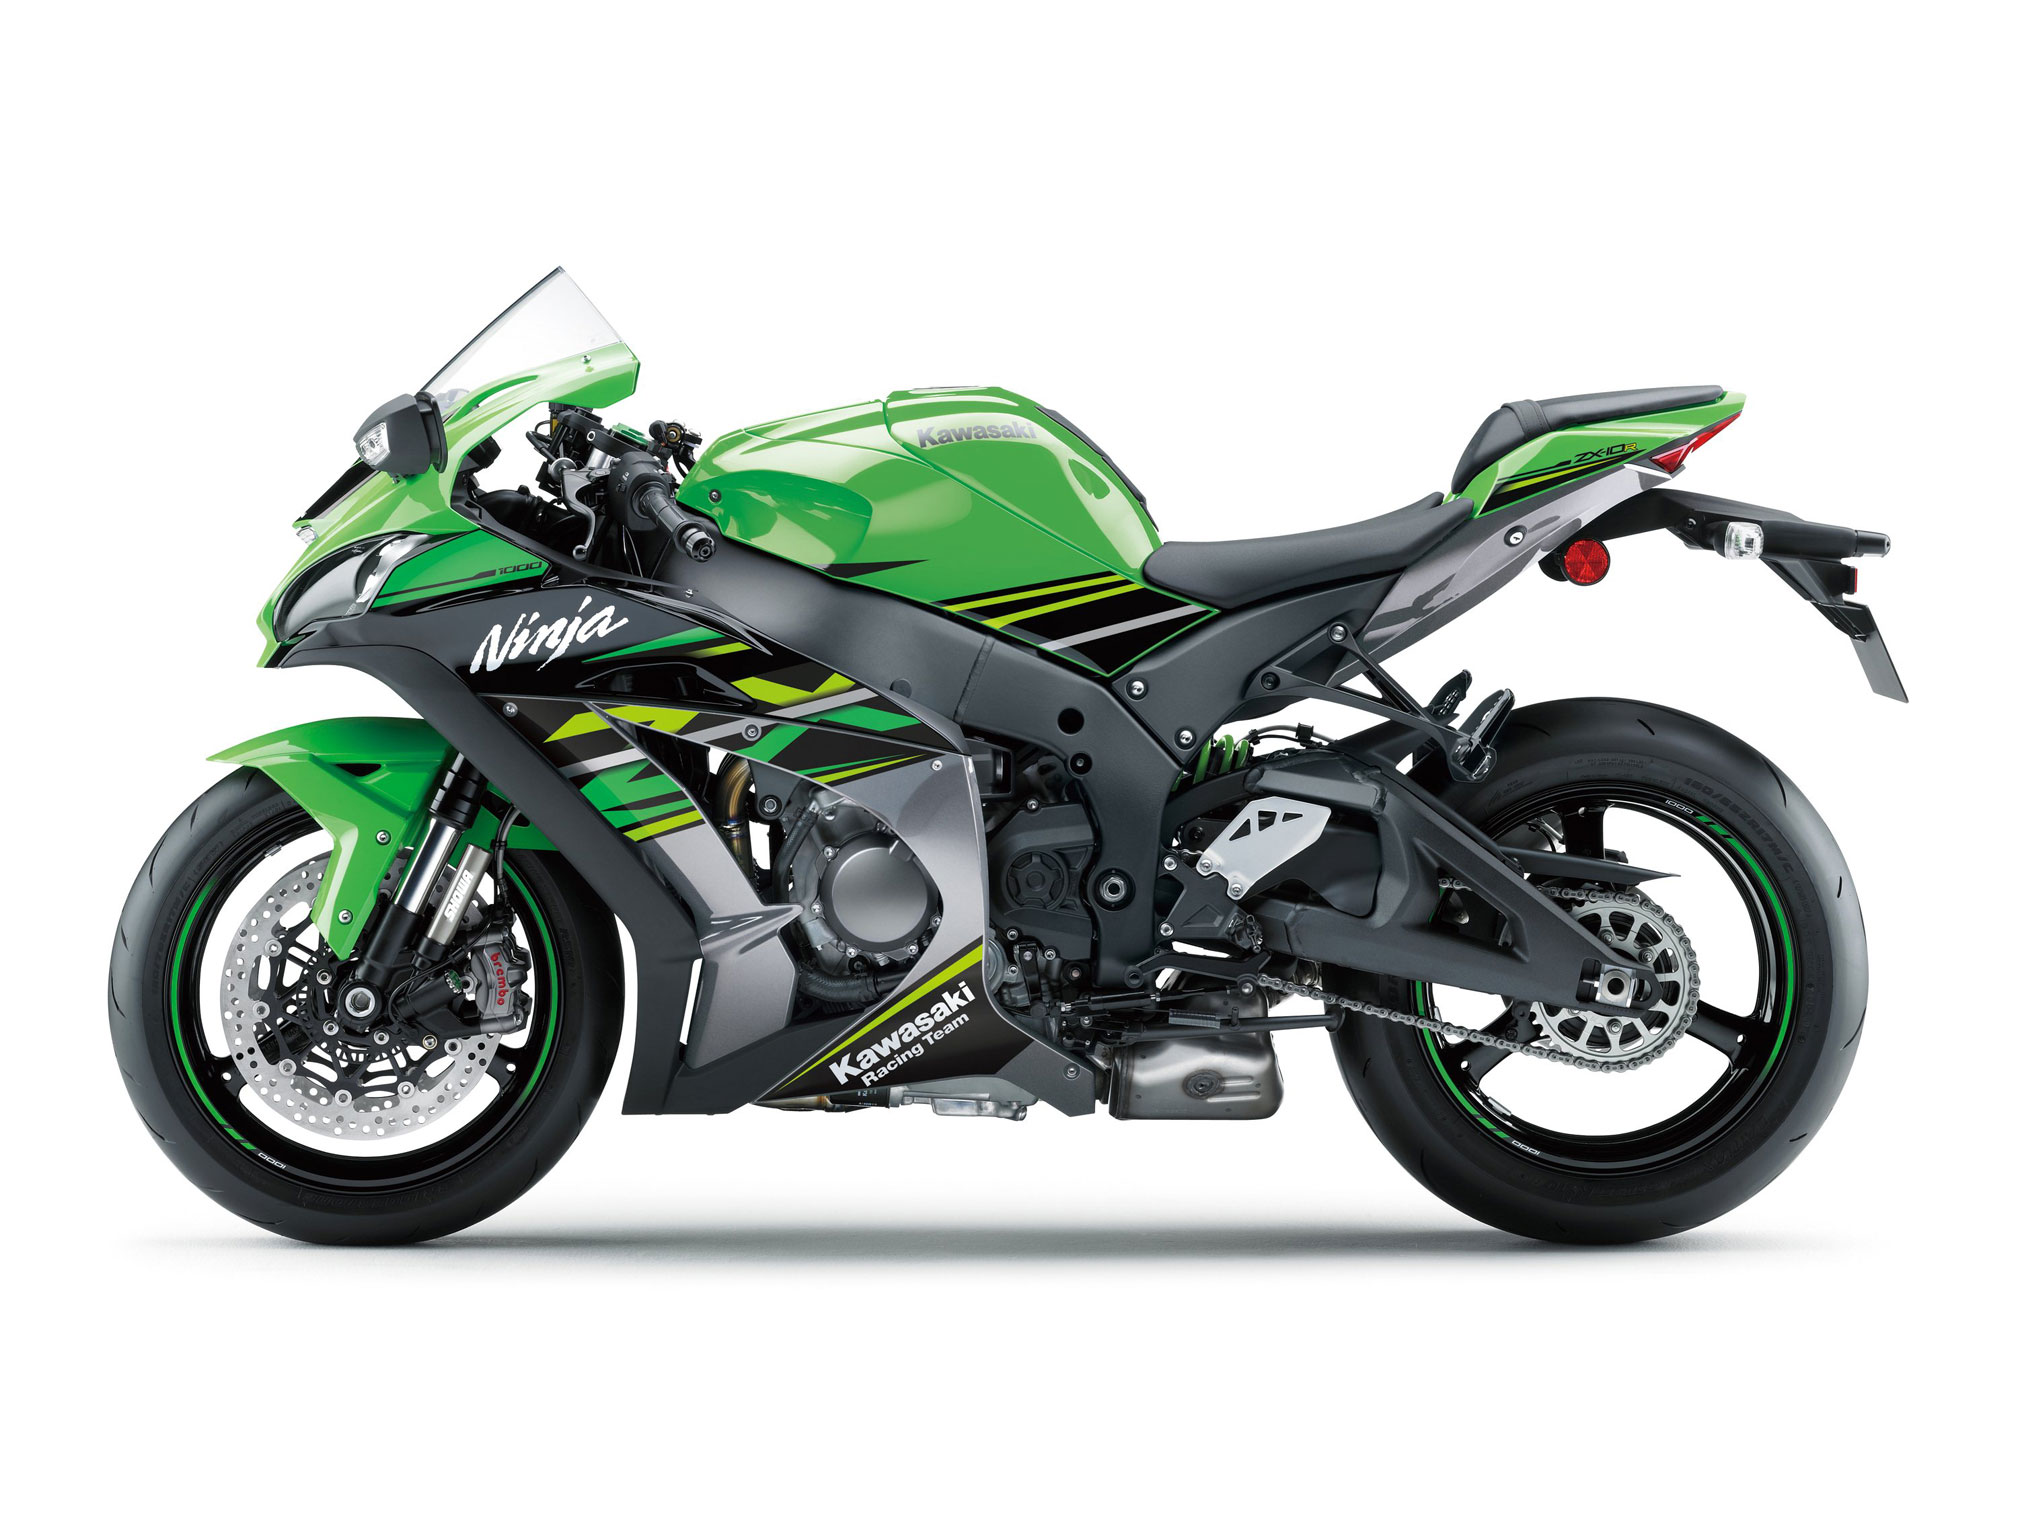 ZX 10RR ABS (ZX 1000 ZJF)